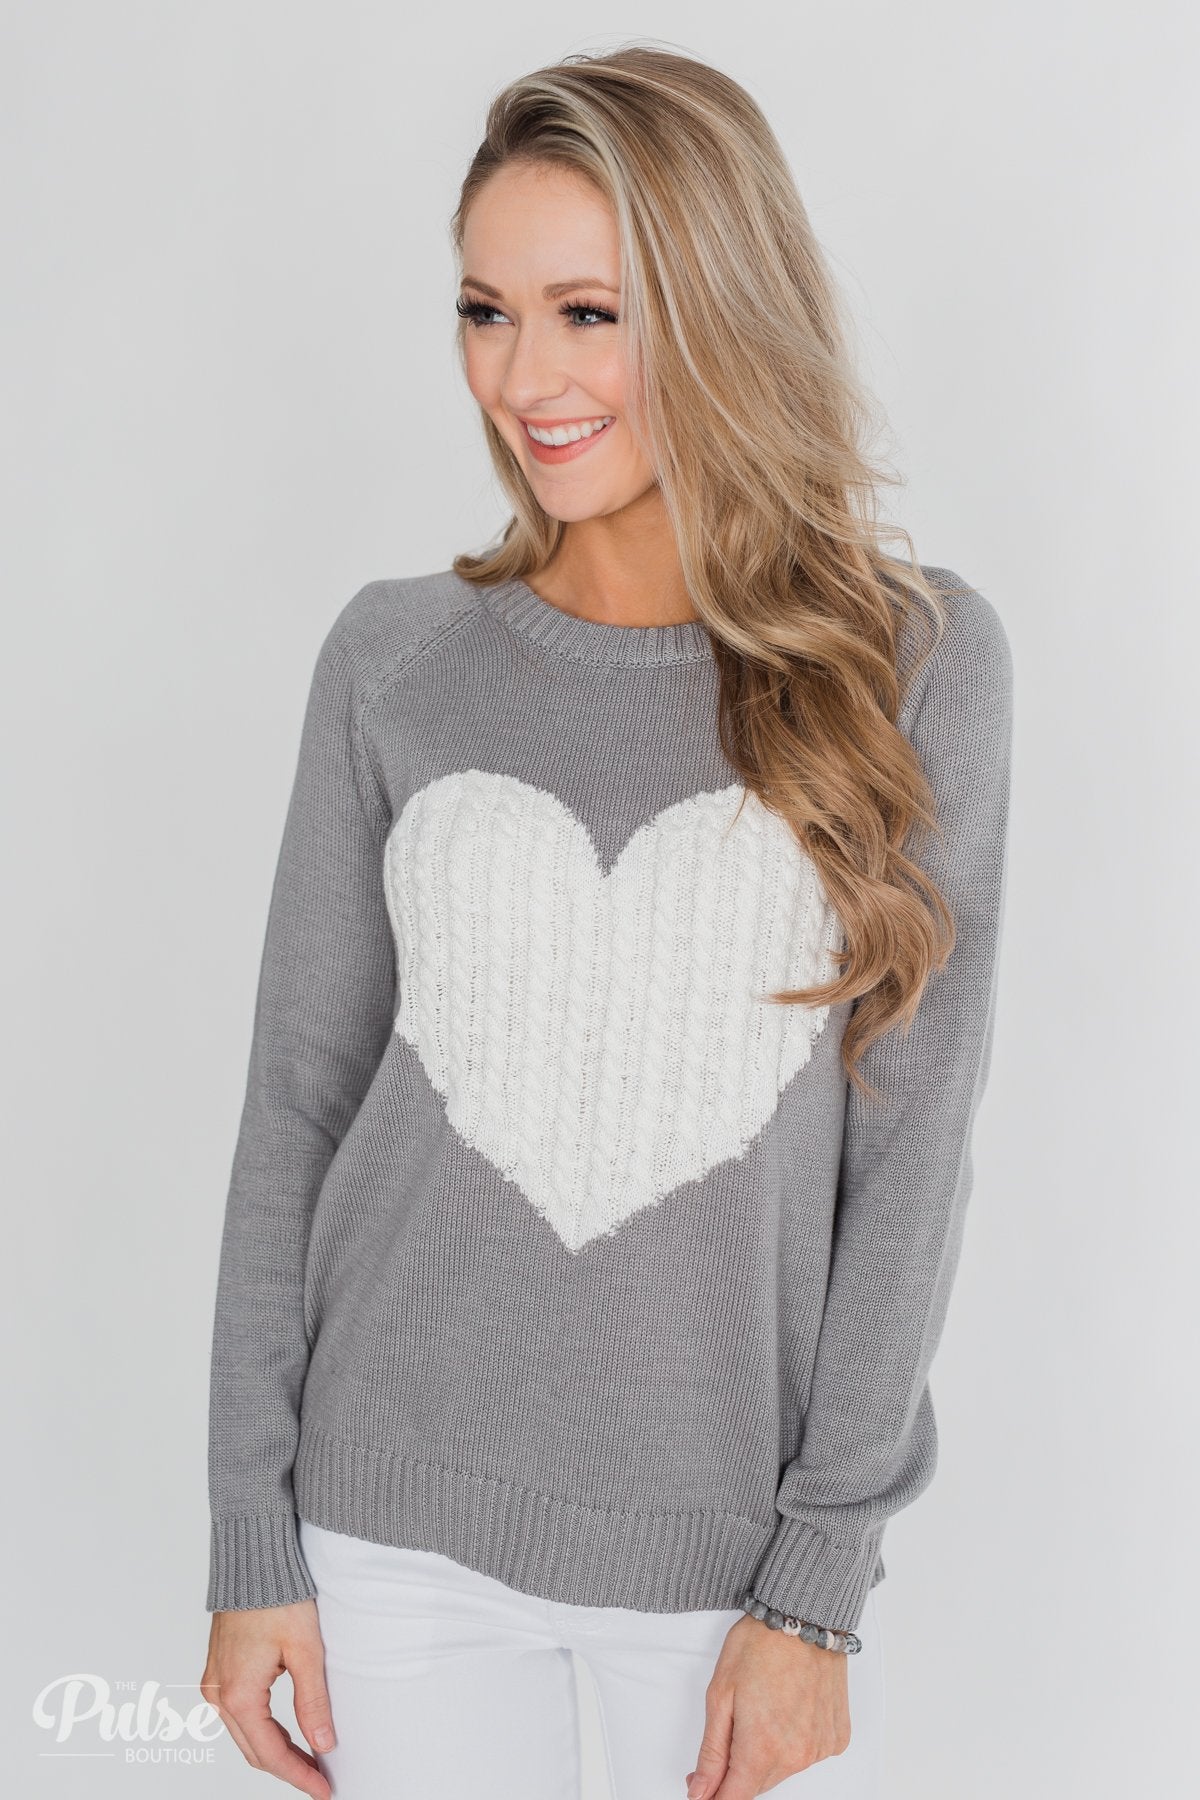 Follow Your Heart Knitted Sweater- Grey